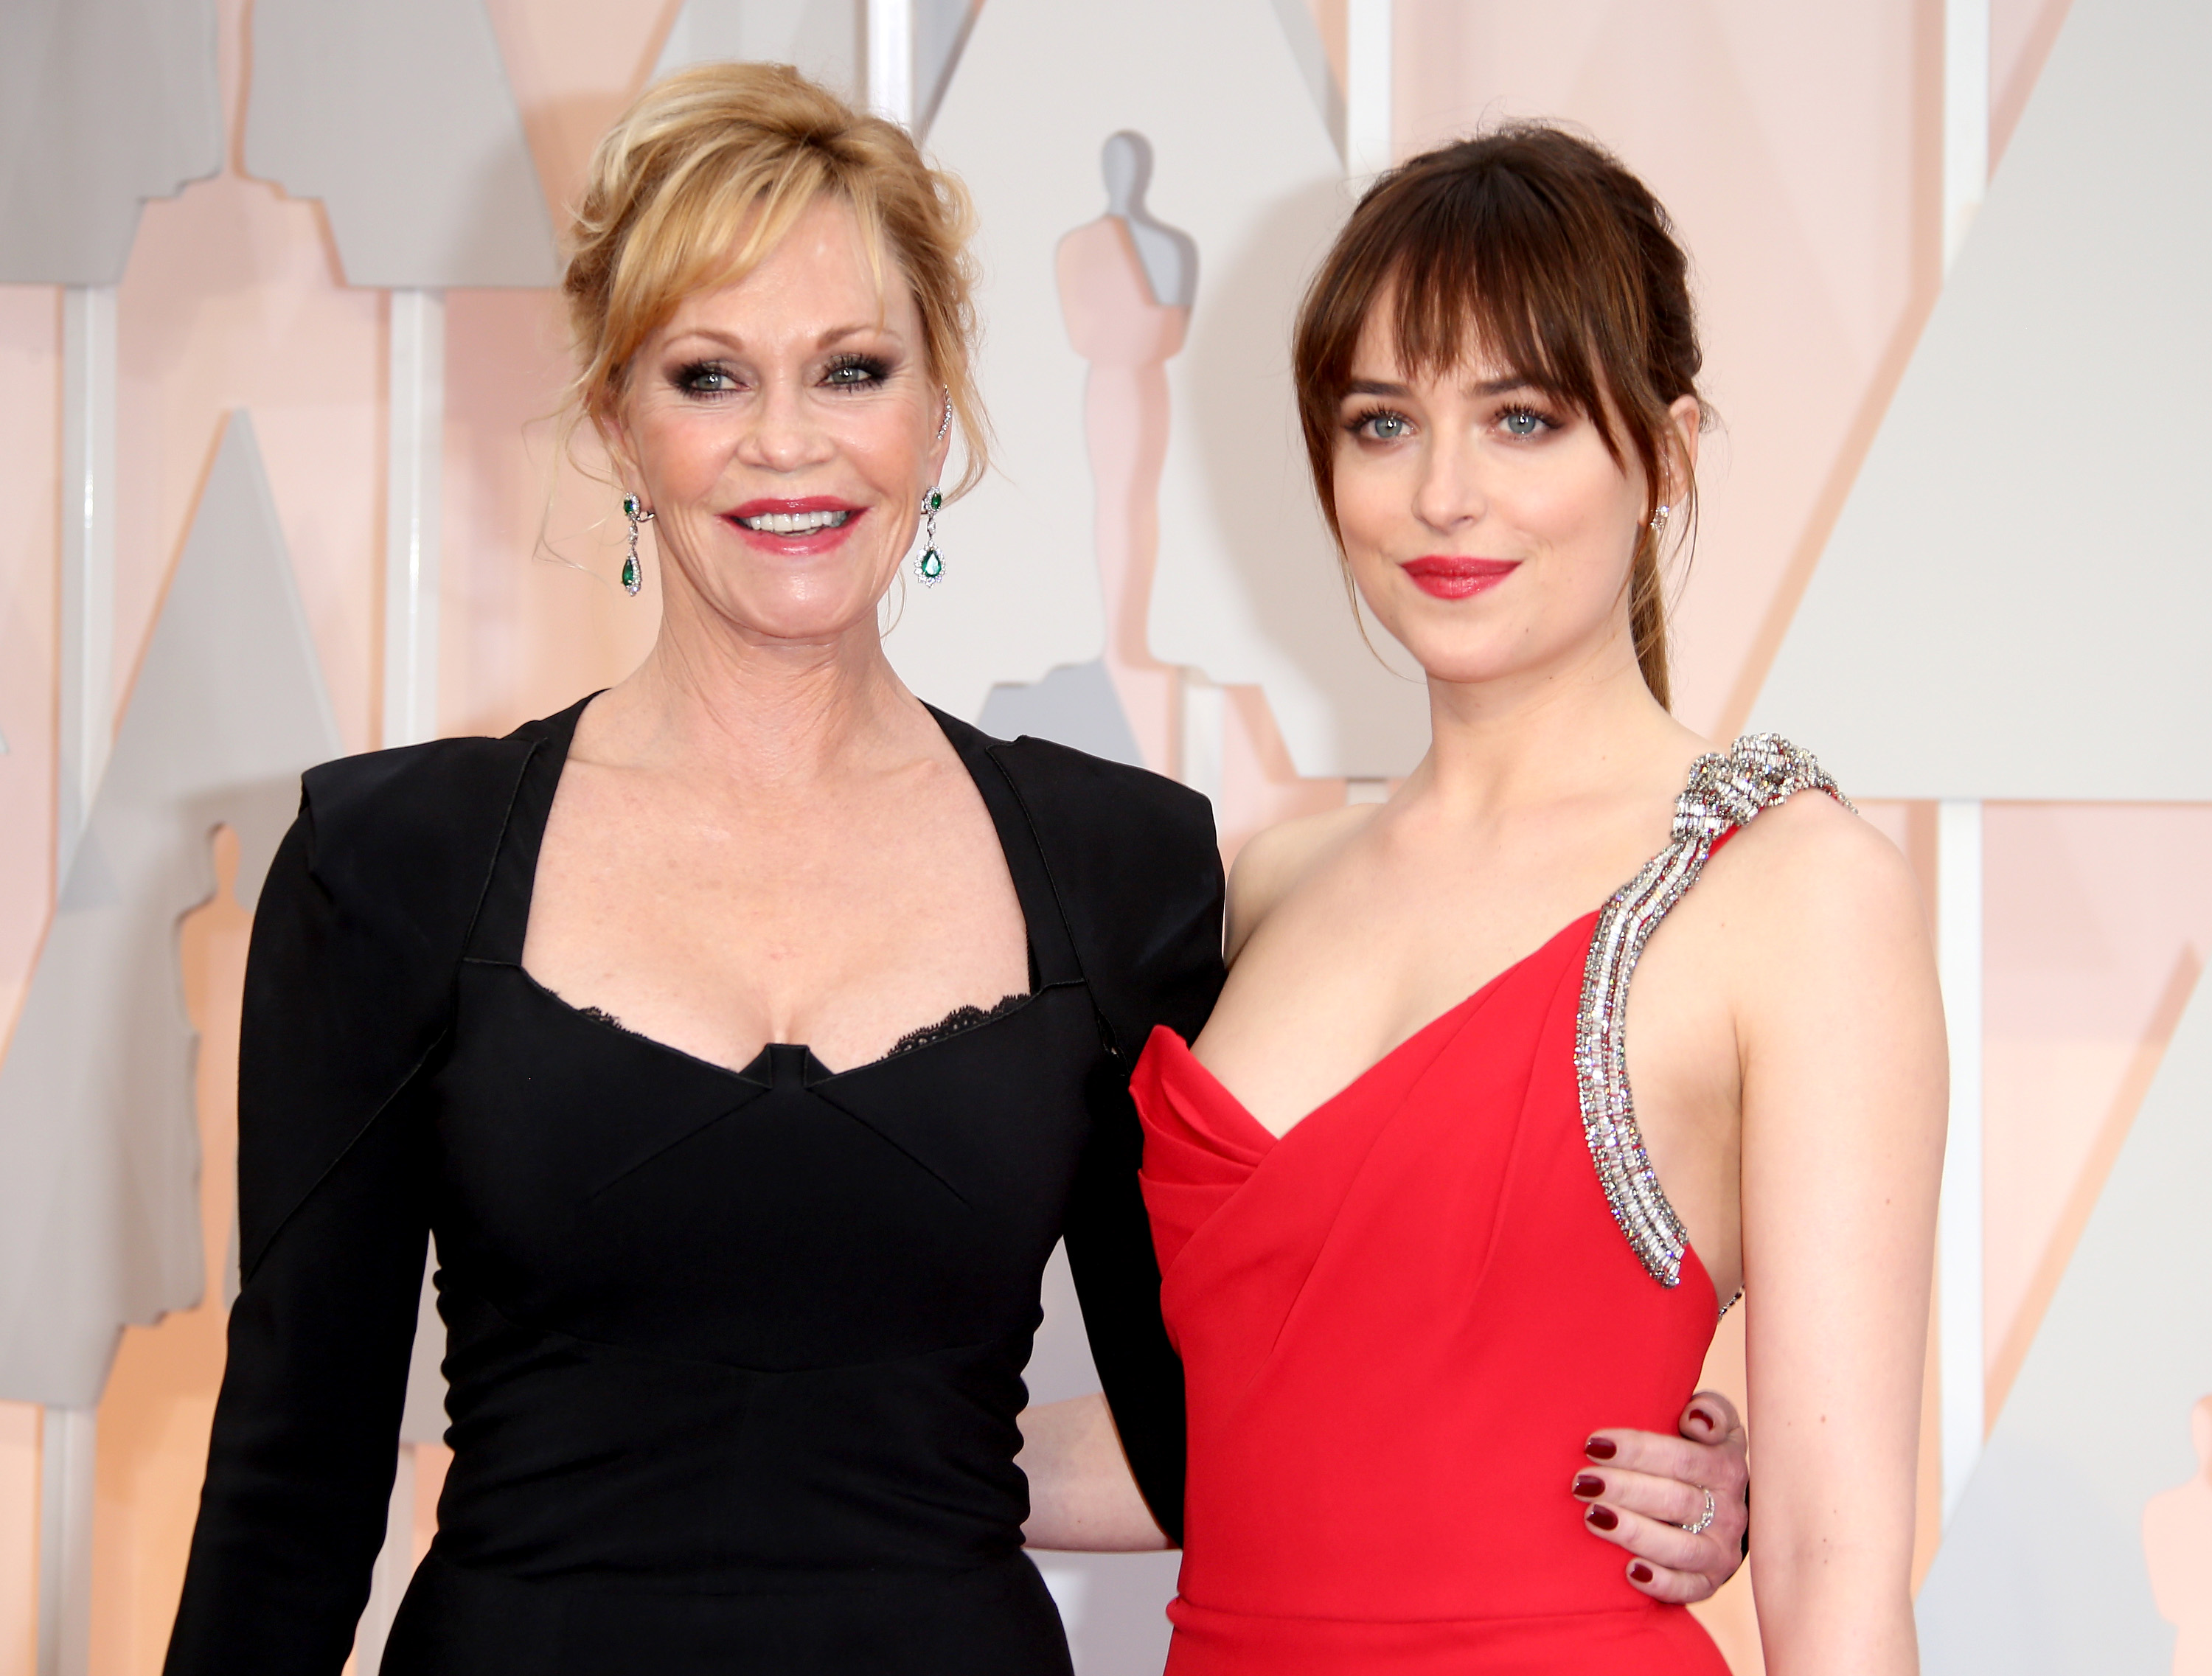 Melanie Griffith and Dakota Johnson at the 87th Annual Academy Awards on February 22, 2015, in Los Angeles. | Source: Getty Images